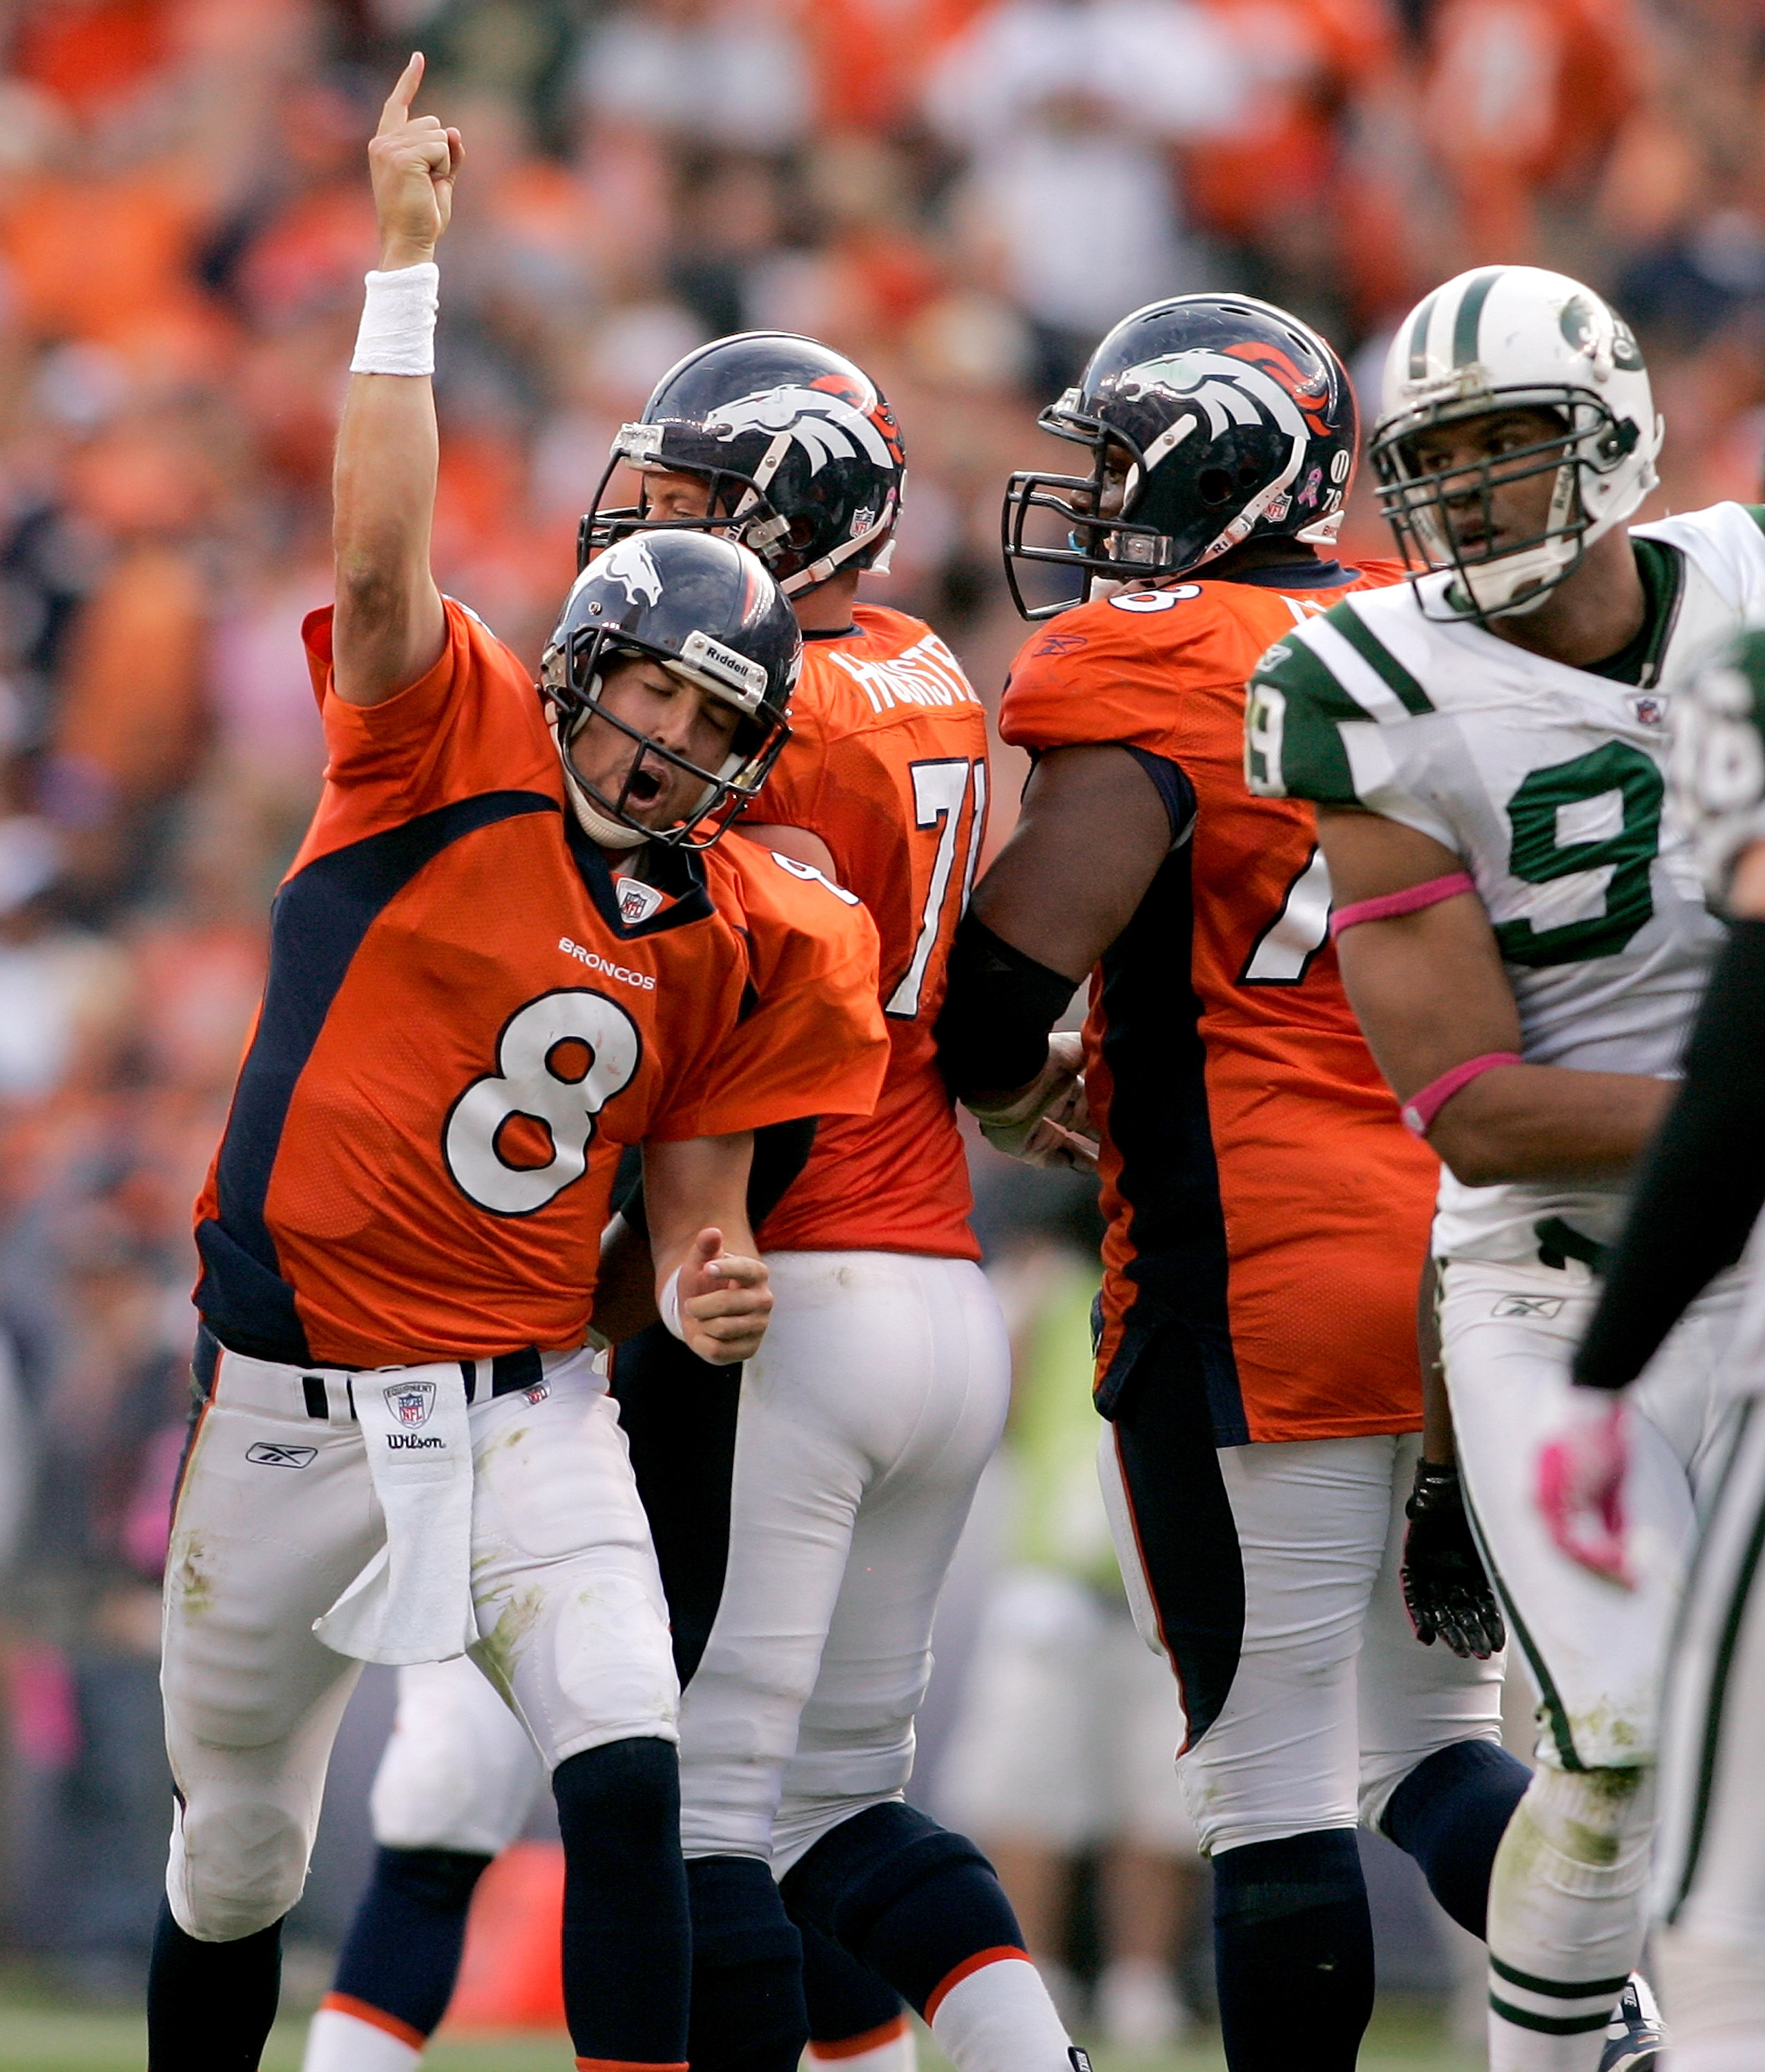 DENVER - OCTOBER 17:  Quarterback Kyle Orton #8 of the Denver Broncos signals for a first down against the New York Jets at INVESCO Field at Mile High on October 17, 2010 in Denver, Colorado.  (Photo by Justin Edmonds/Getty Images)